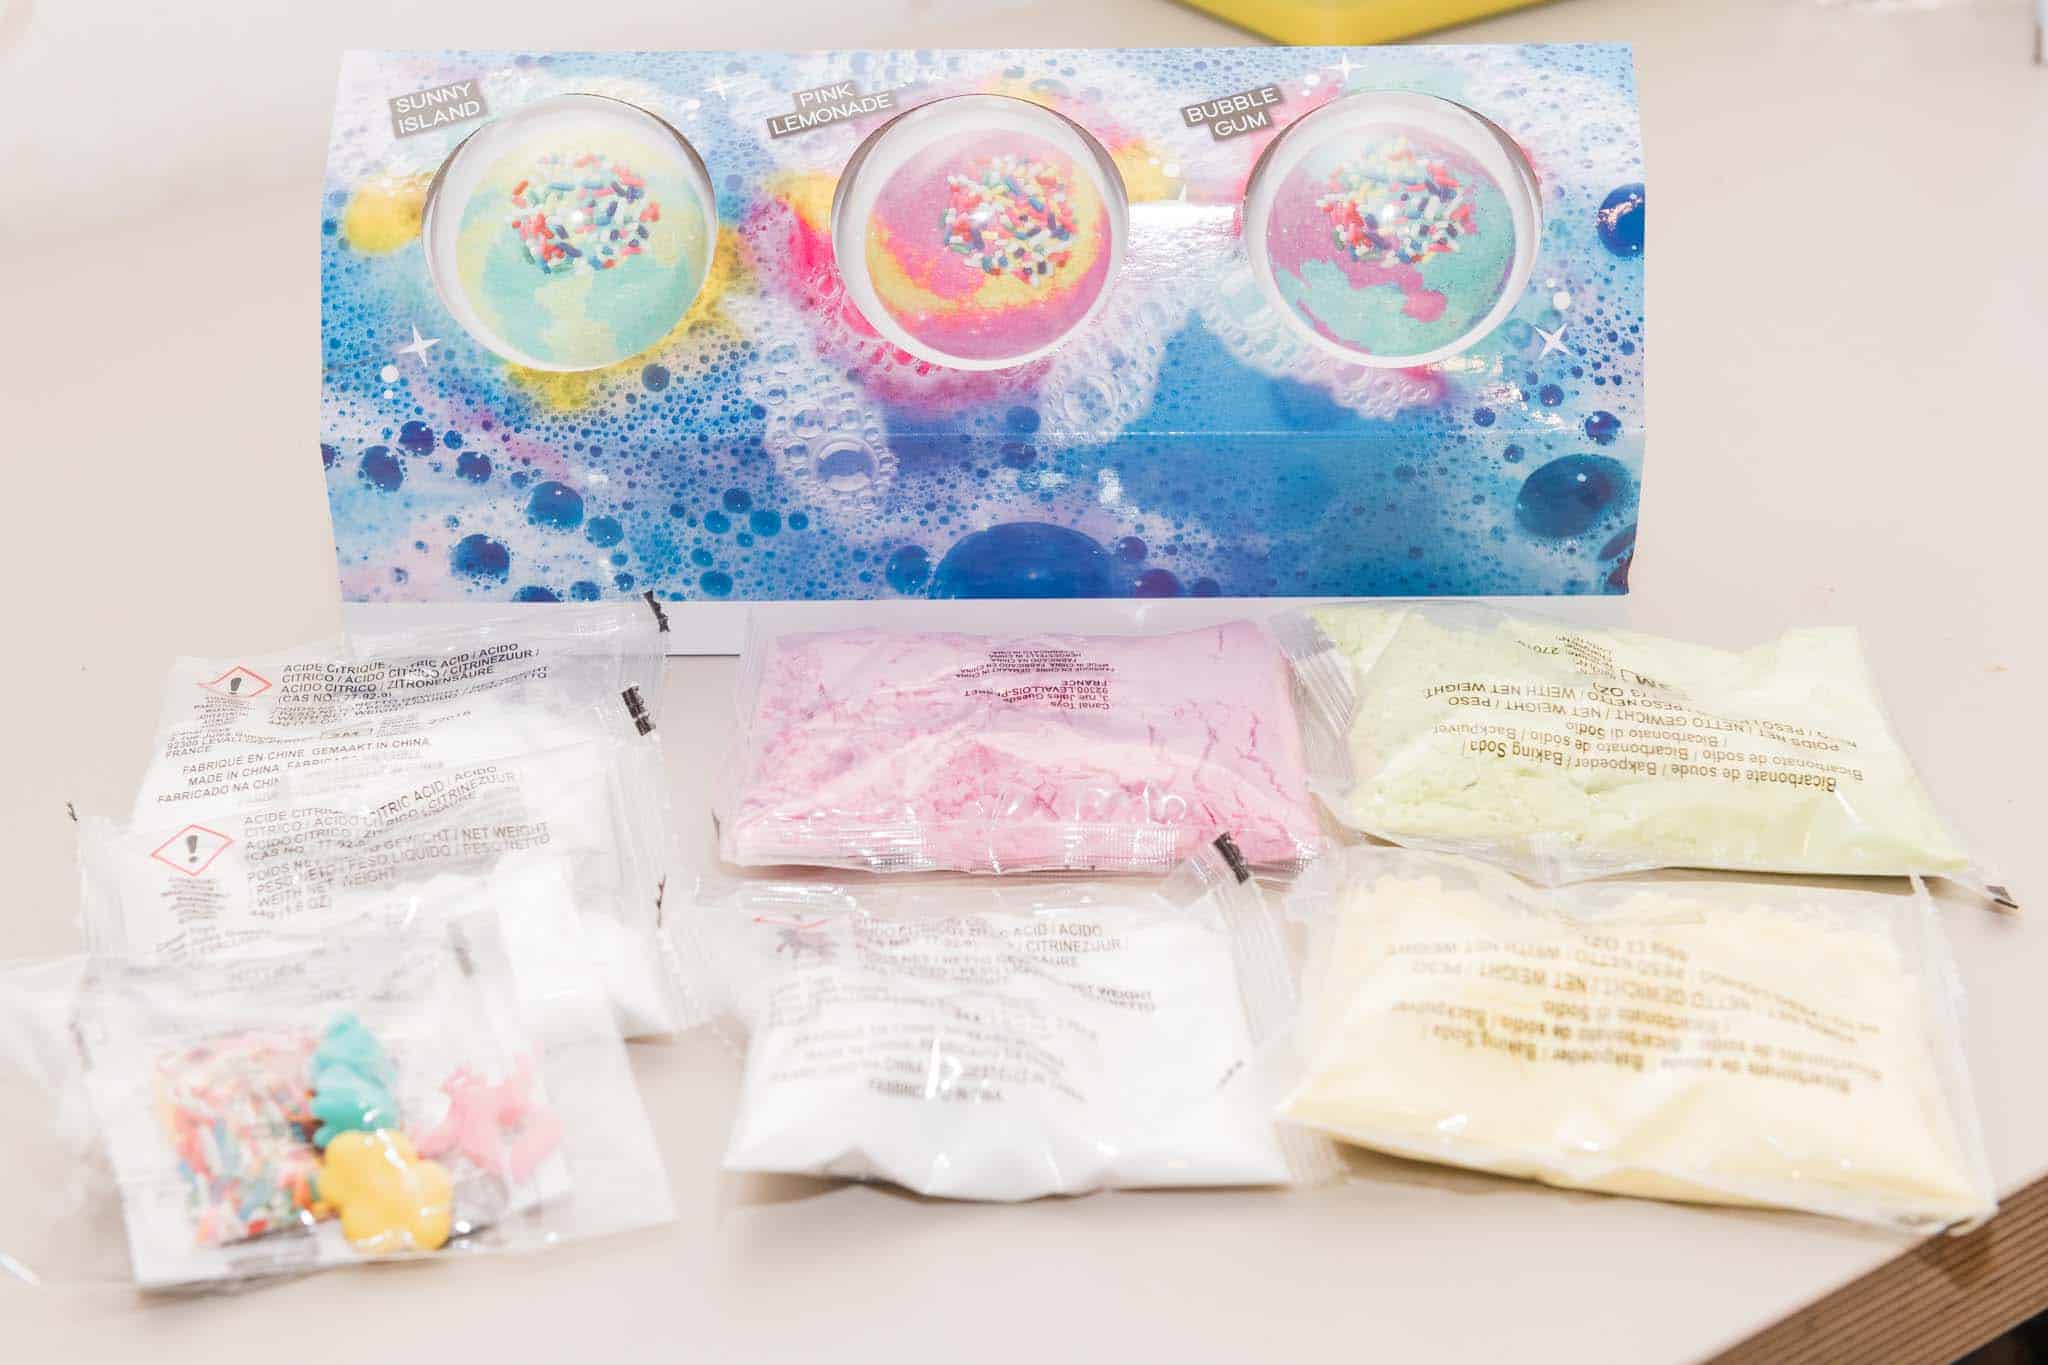 So Bomb DIY 3-Pack Make Your Own Fizzy Bath Bomb Kit & 3 Blister Pack Bath  Bombs